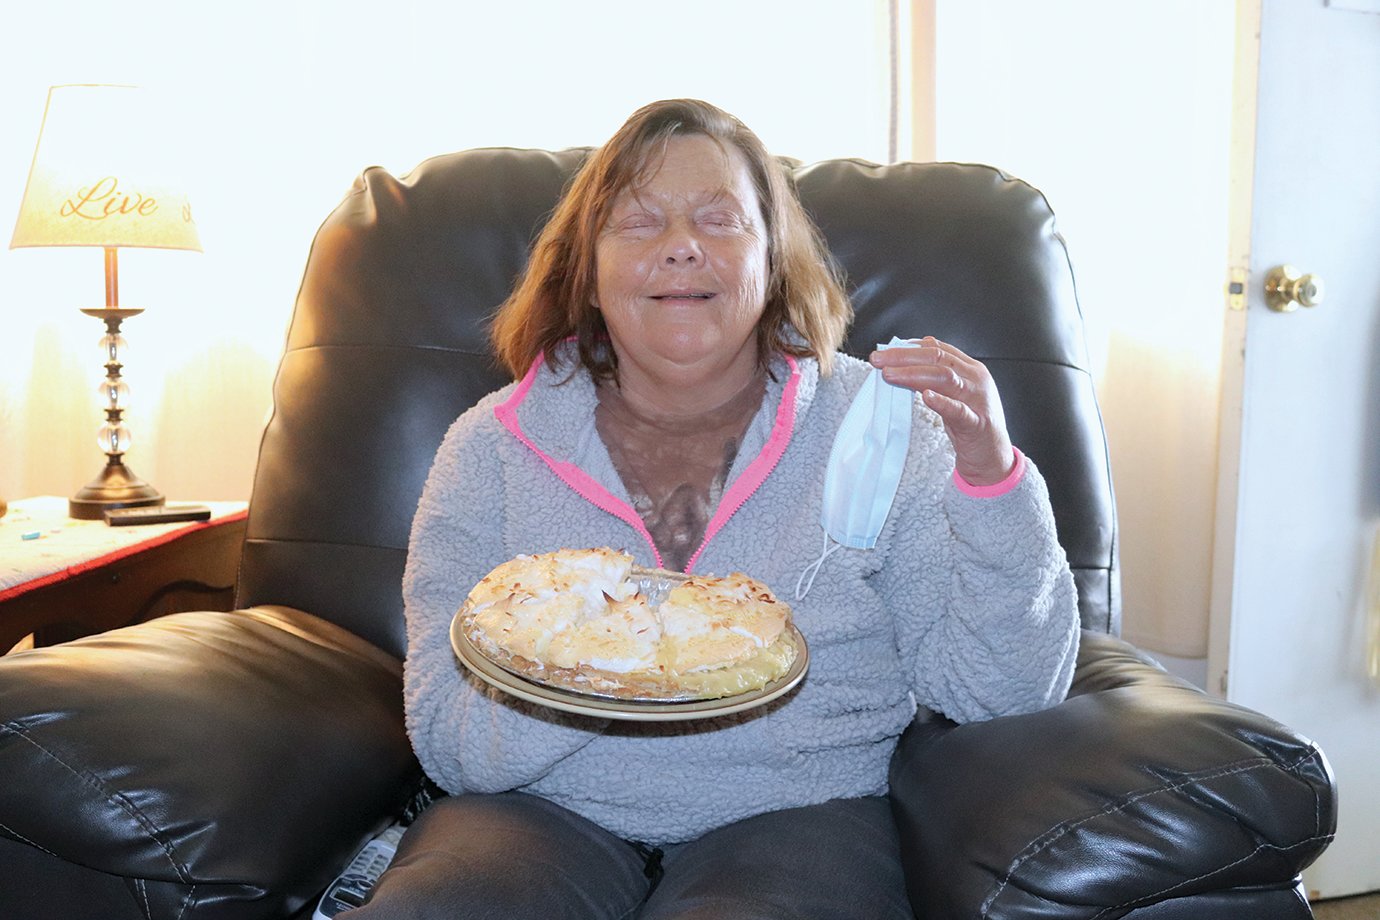 A coconut cream pie for the chef represents the many pies, turkeys and other traditional Thanksgiving favorites made for people in need this week by southside Crawfordsville resident Susan Weliver. With many family gatherings postponed or canceled this year, including her own, Weliver created a recipe of compassion to serve 26 meals on Thanksgiving Day despite suffering from health issues, visual impairment and a day-of hand injury.